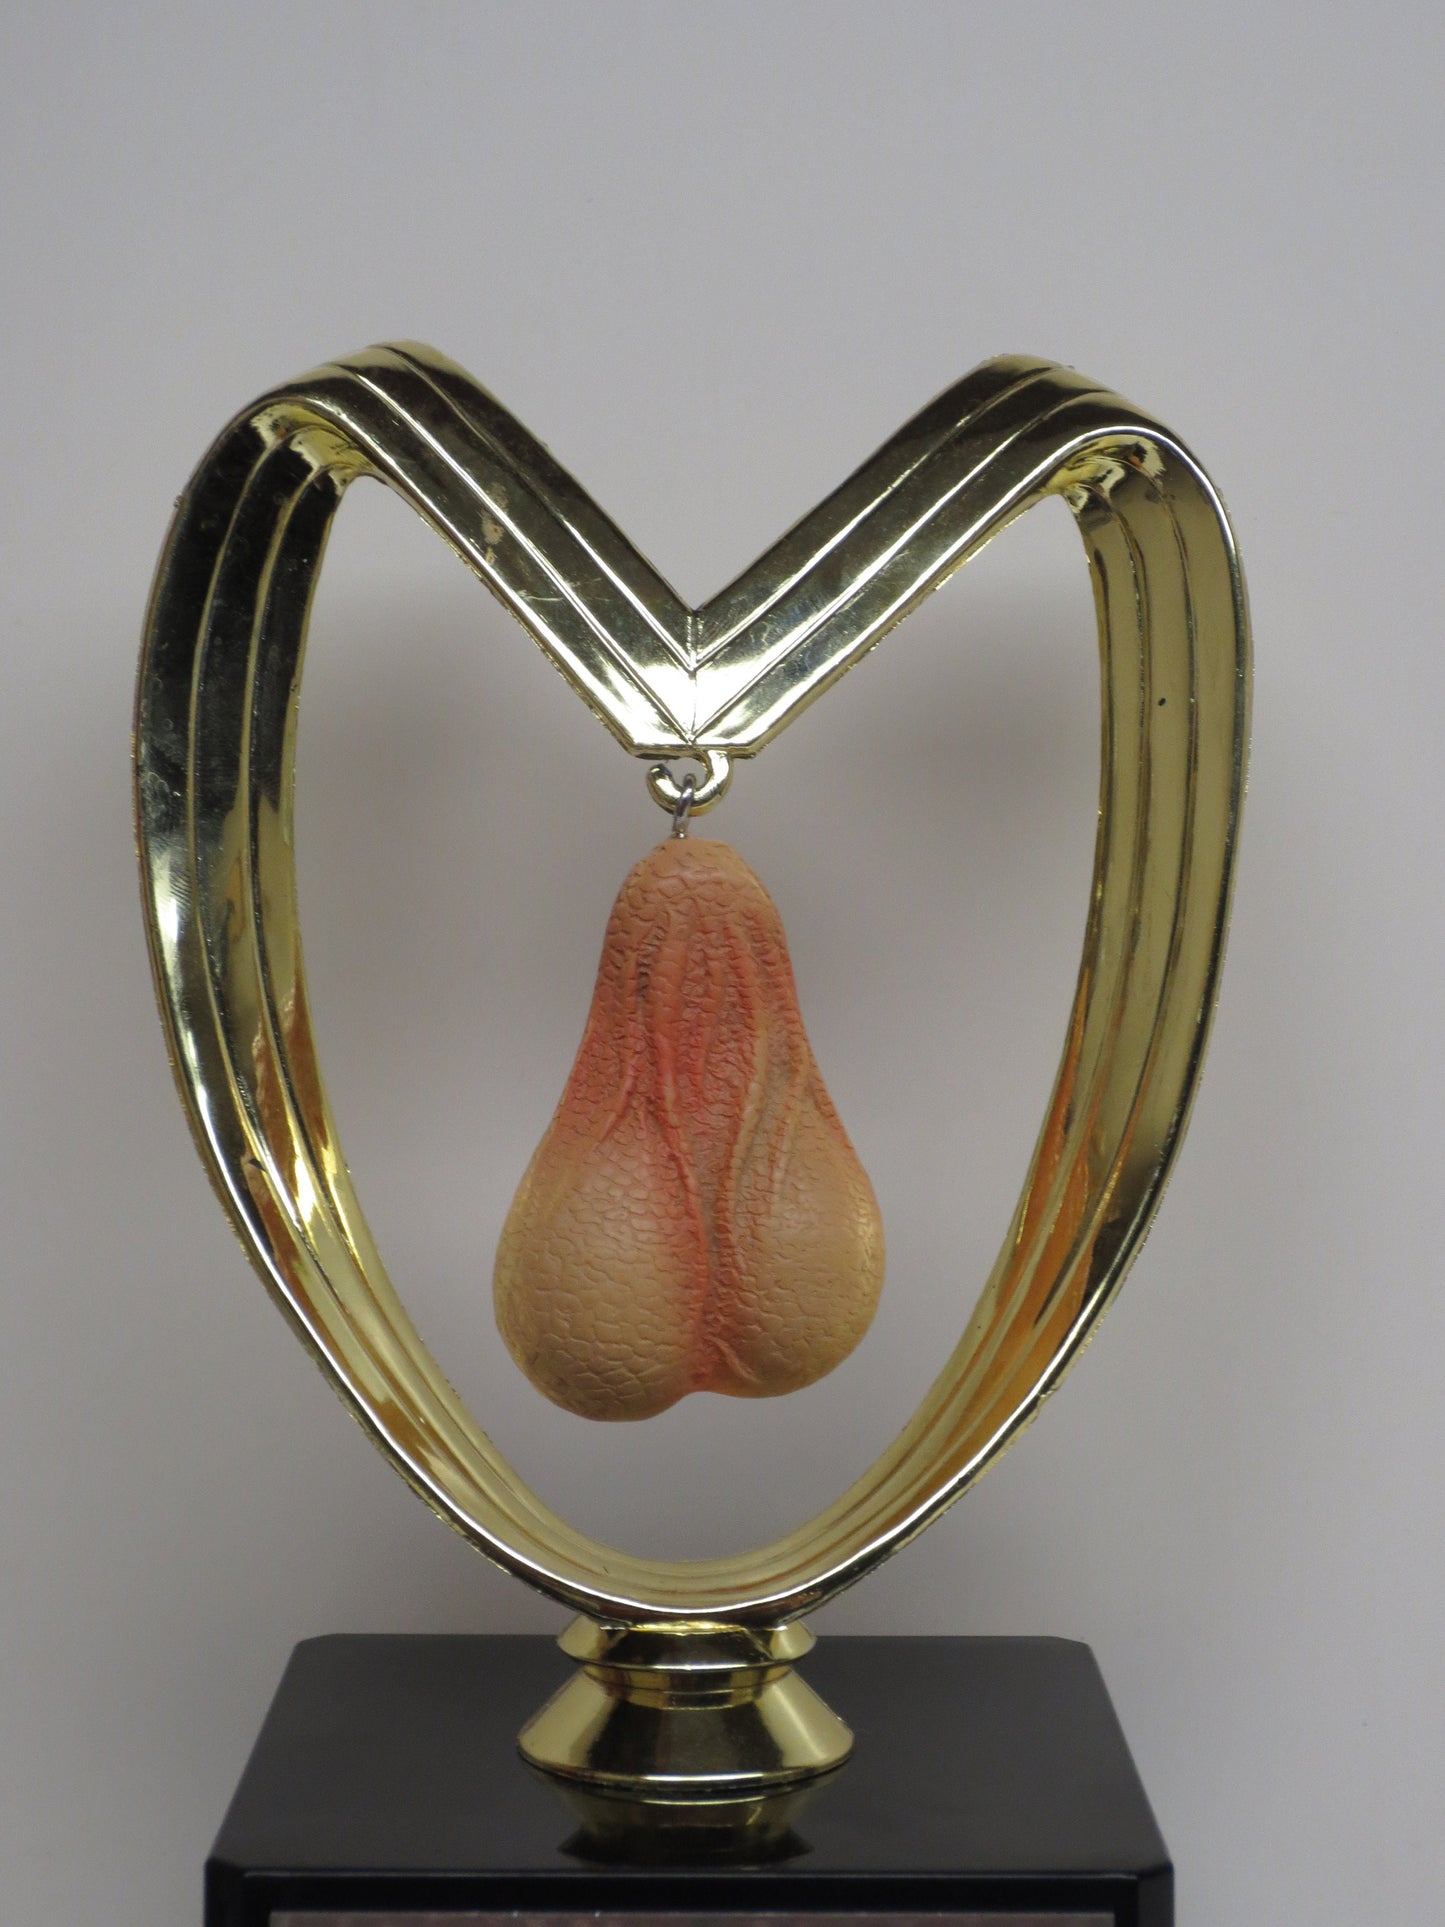 FFL Trophy Awww Nuts! Last Place Loser Sacko Grow A Pair You've Got Balls Funny Trophy Adult Humor Gag Gift Testicle Penis Fantasy Football